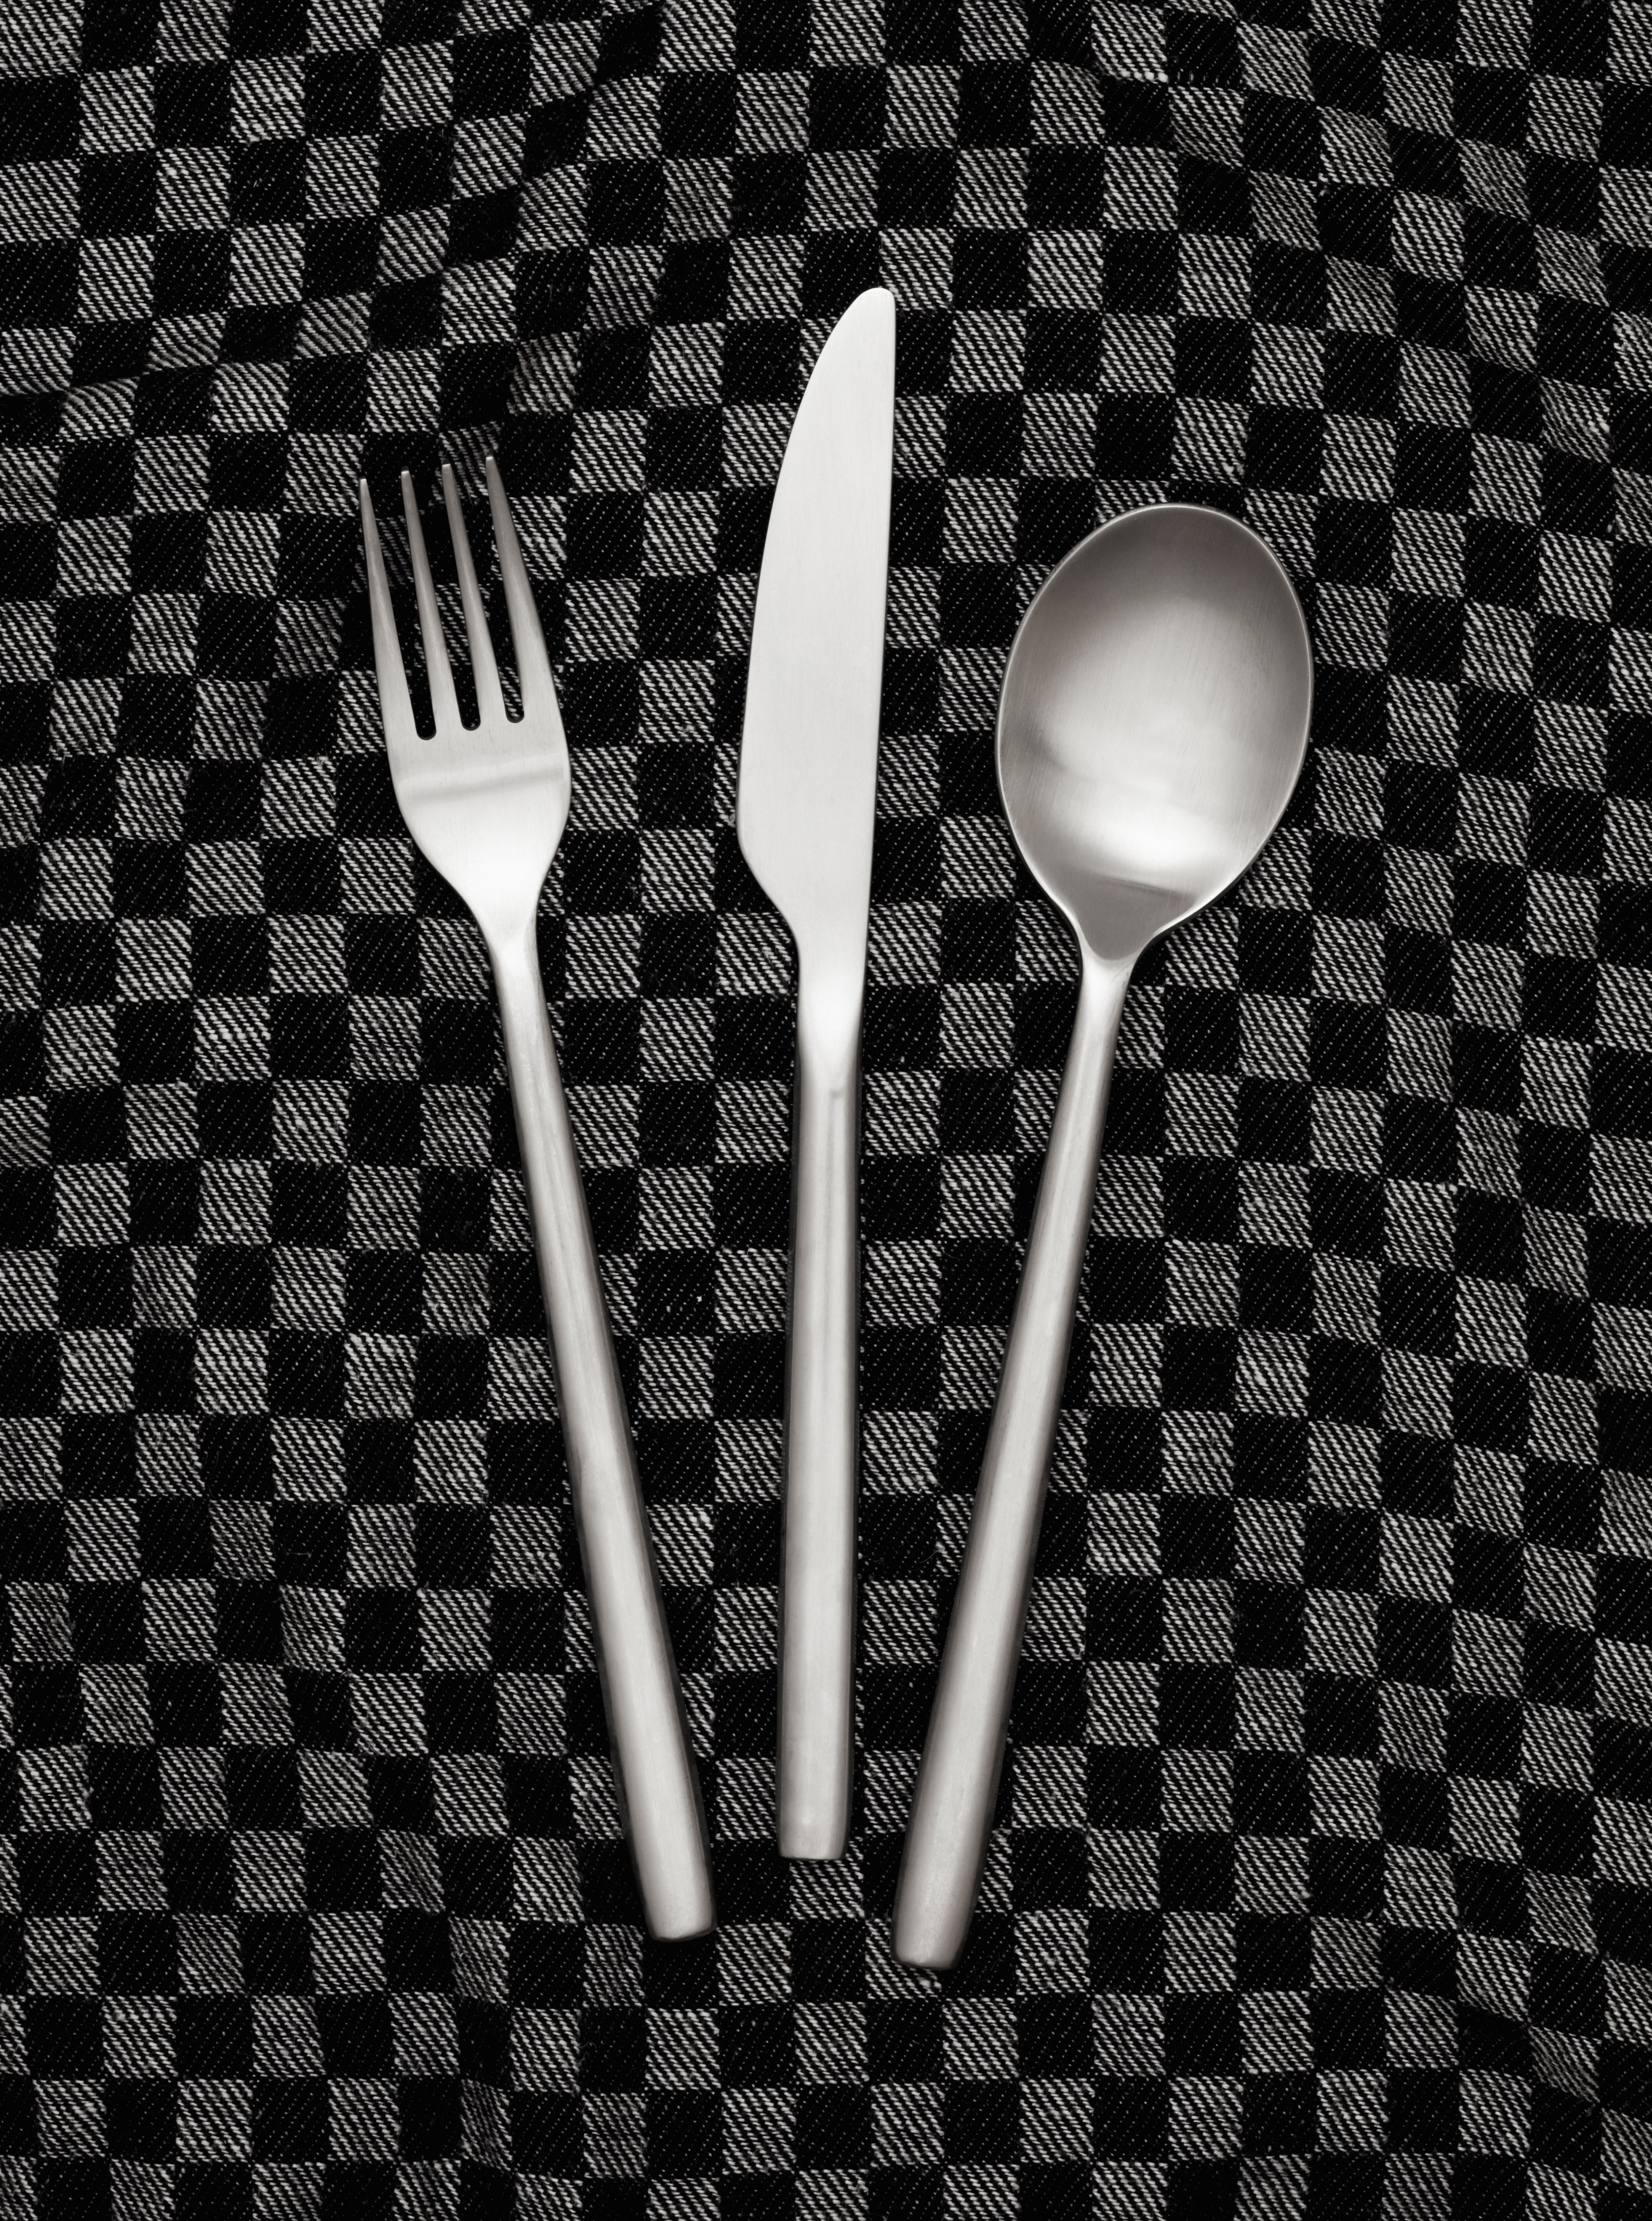 Fork, knife and spoon on dishcloth